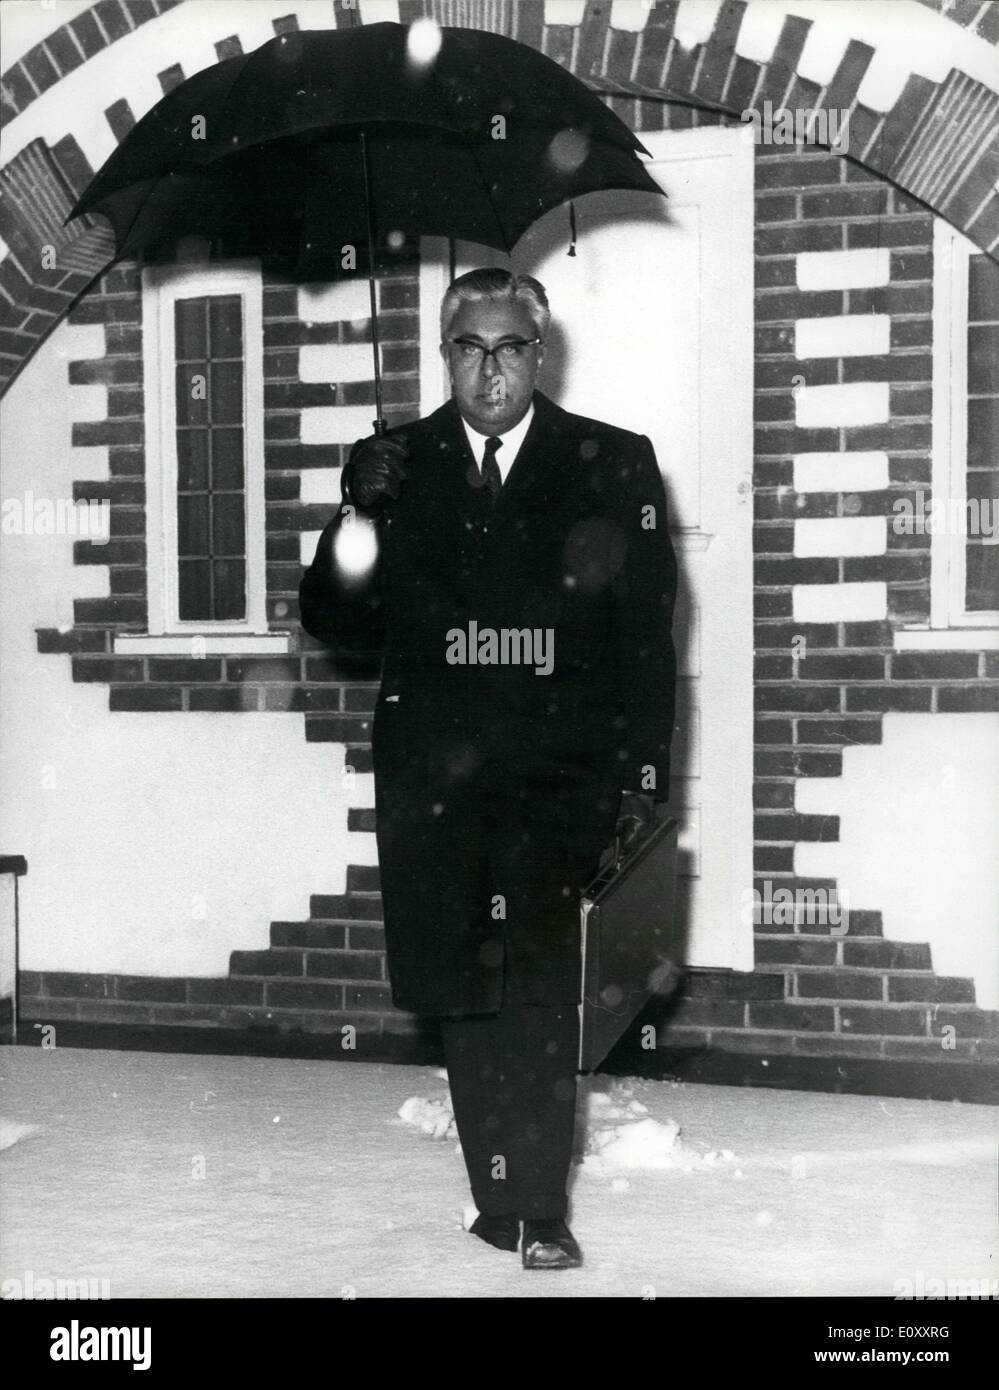 Jan. 09, 1968 - 9-1-68 Savundra Trial opens today Ã¢â‚¬â€œ The trial of Dr. Emil Savundra, 43-year old former head of the Fire, Stock Photo